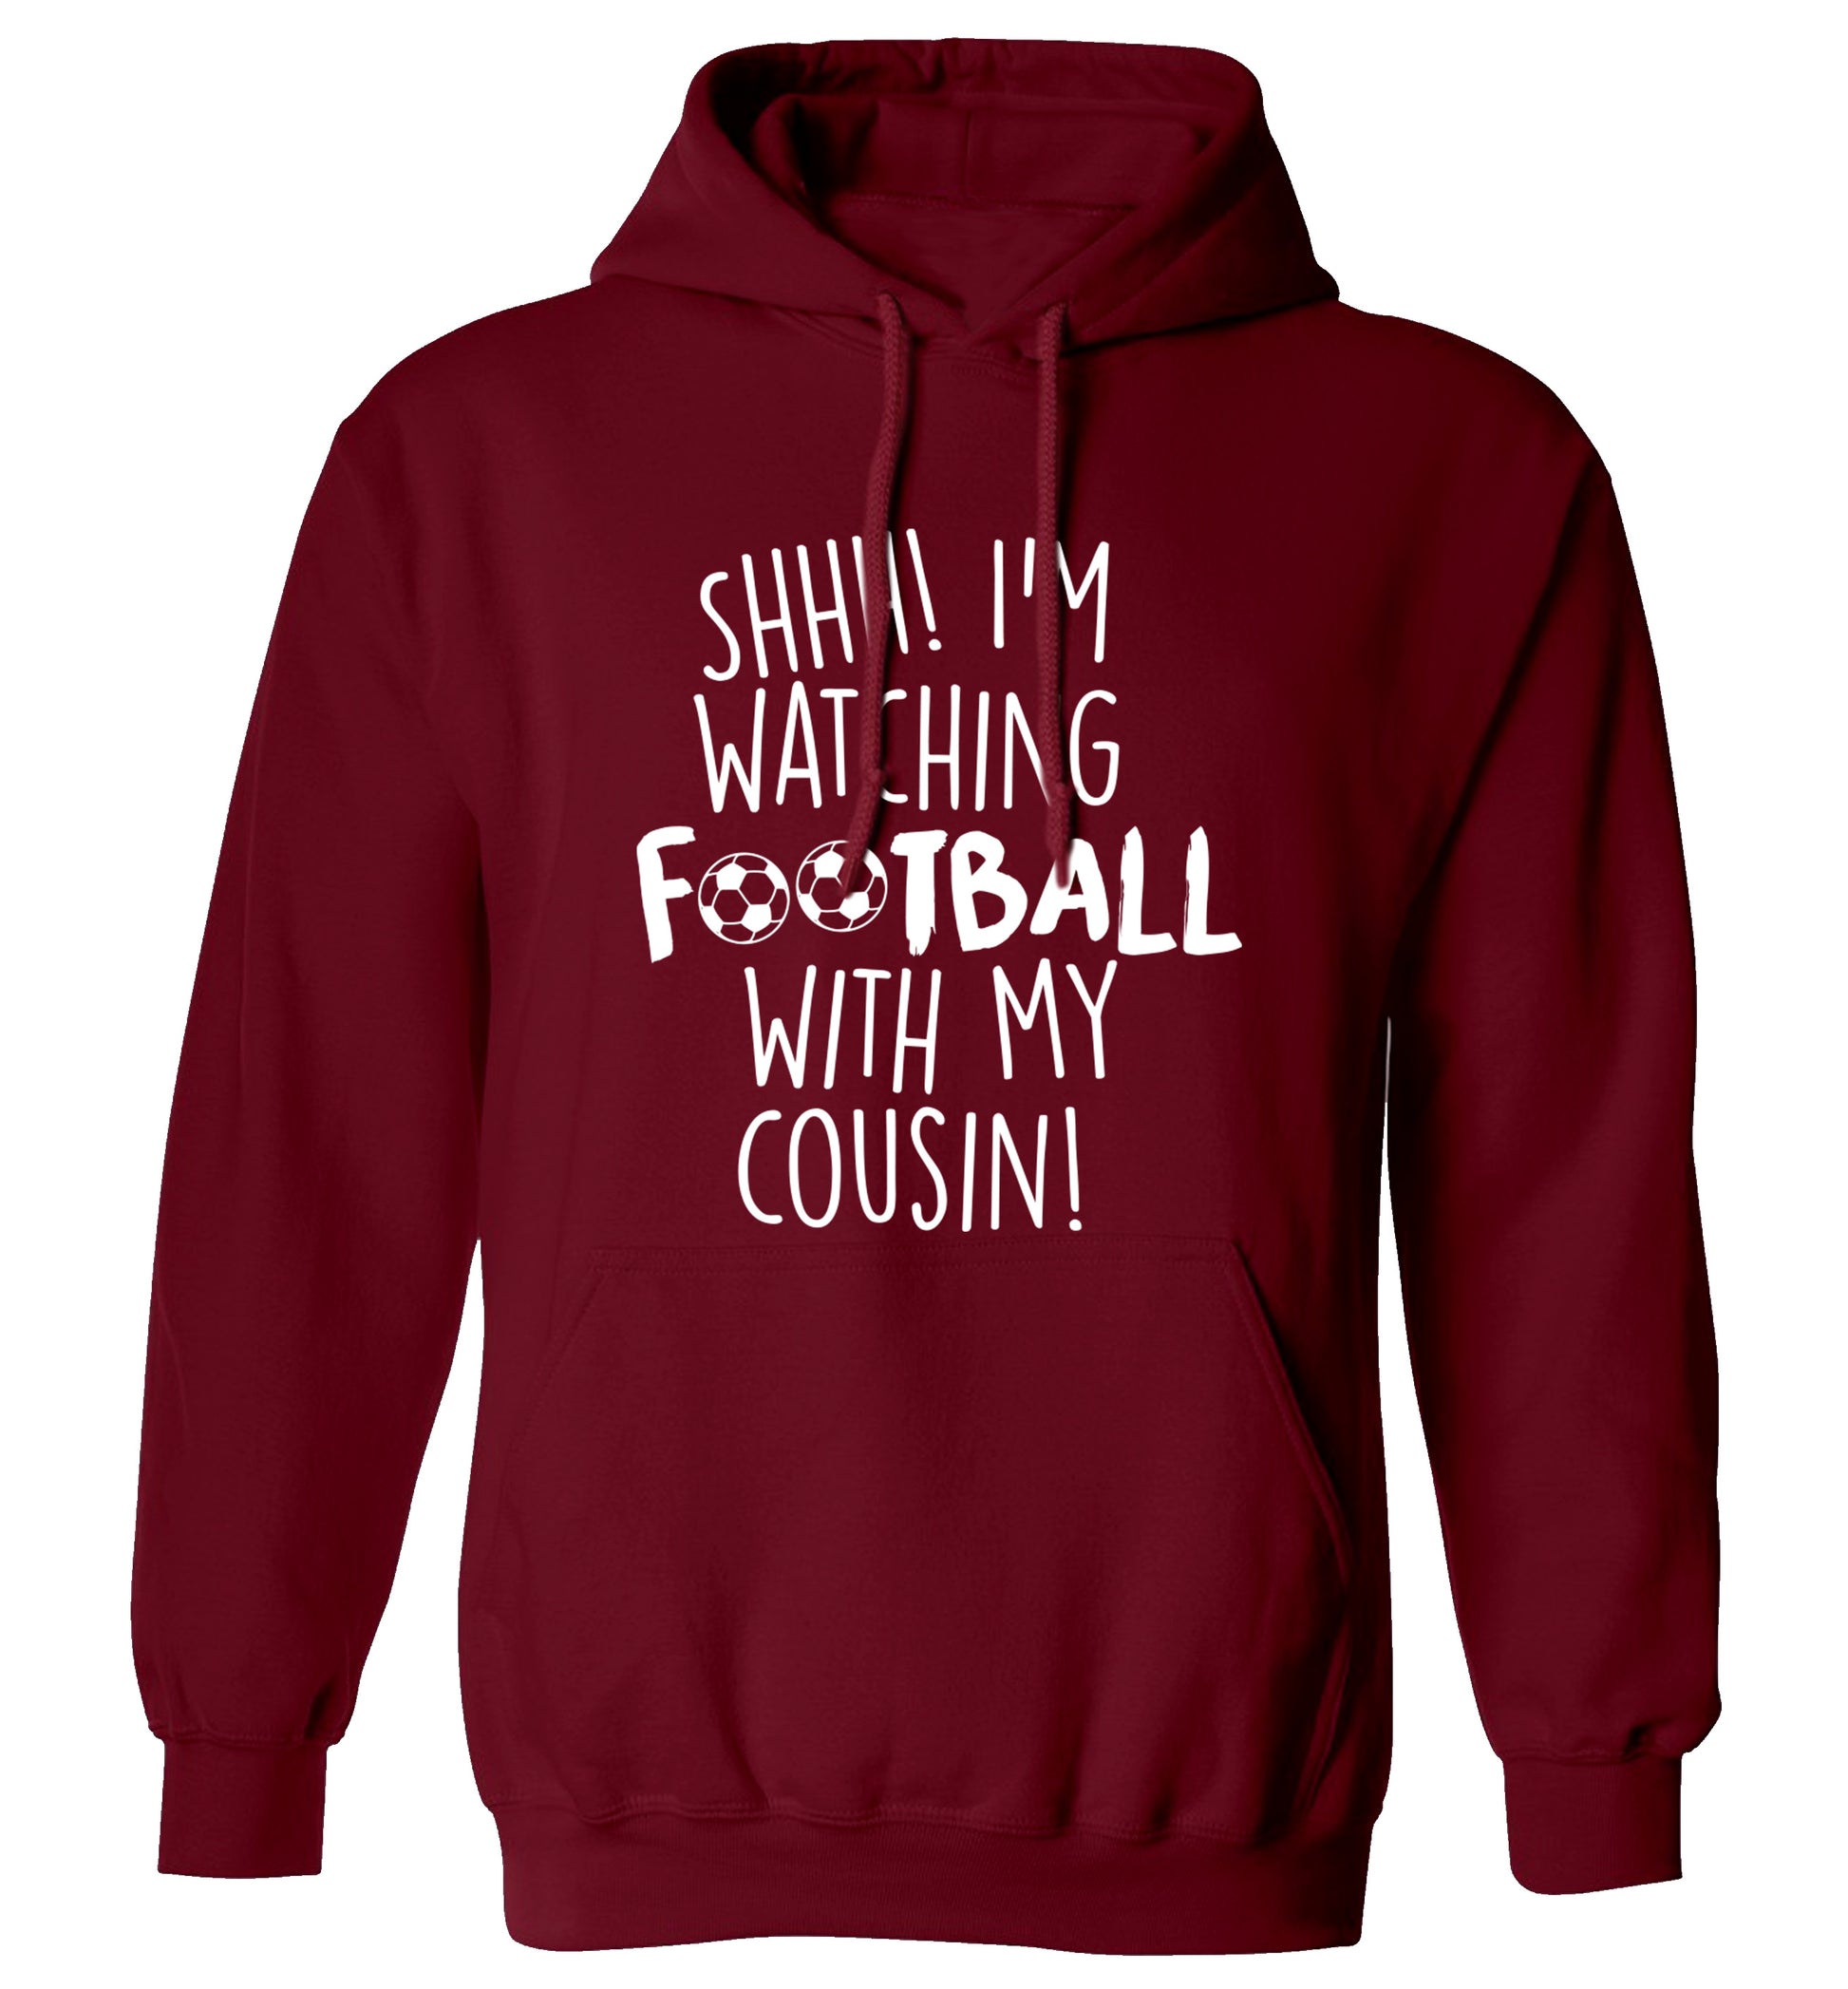 Shhh I'm watching football with my cousin adults unisexmaroon hoodie 2XL